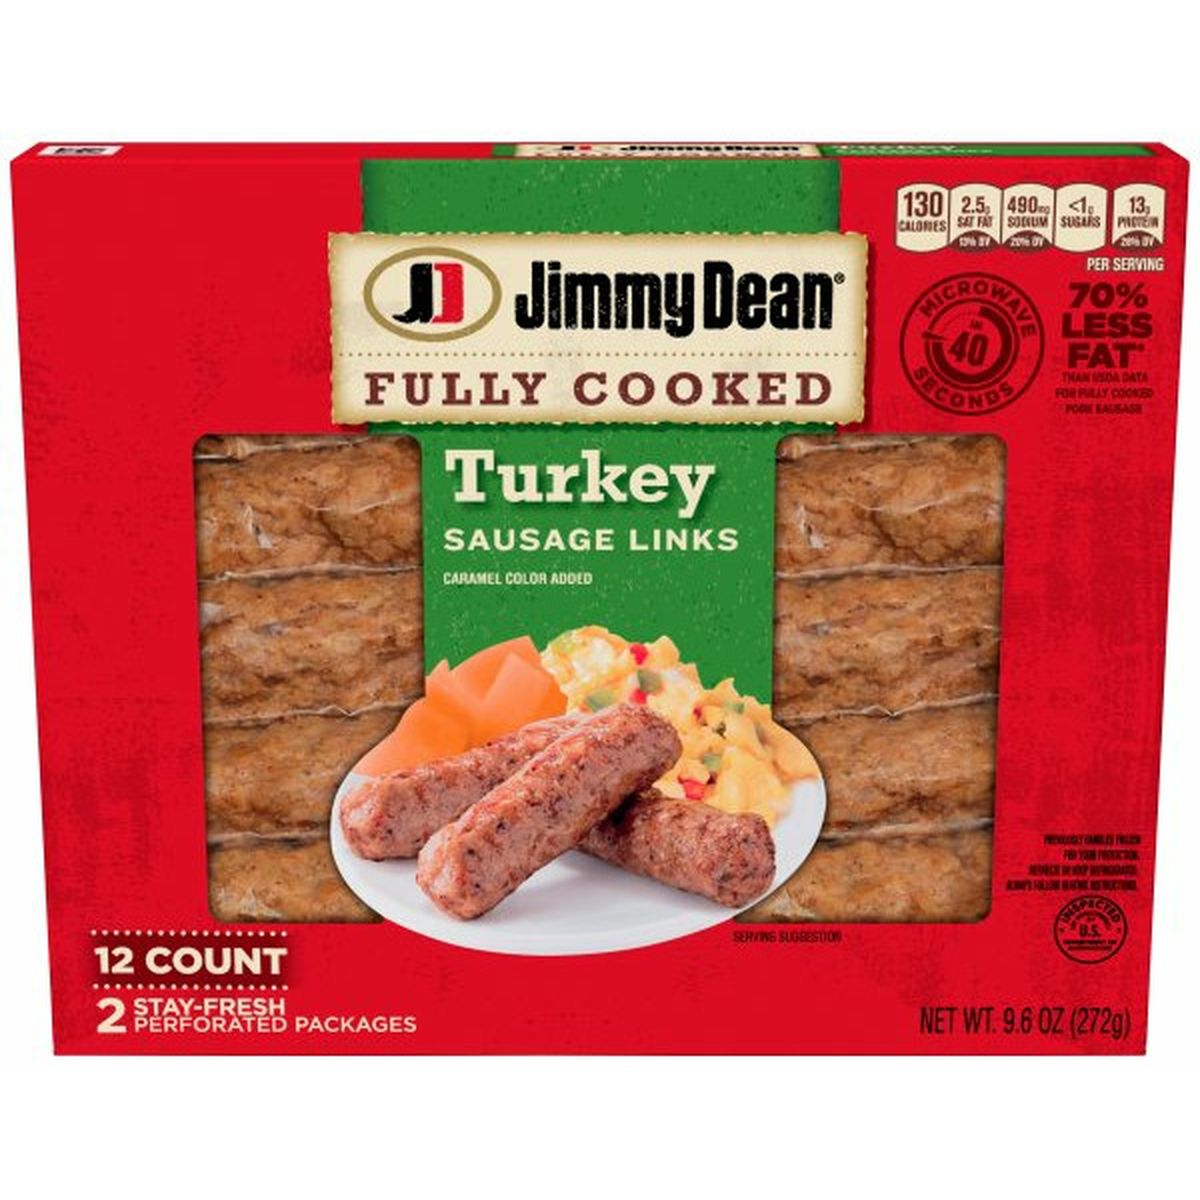 Calories in Jimmy Dean Fully Cooked Breakfast Turkey Sausage Links